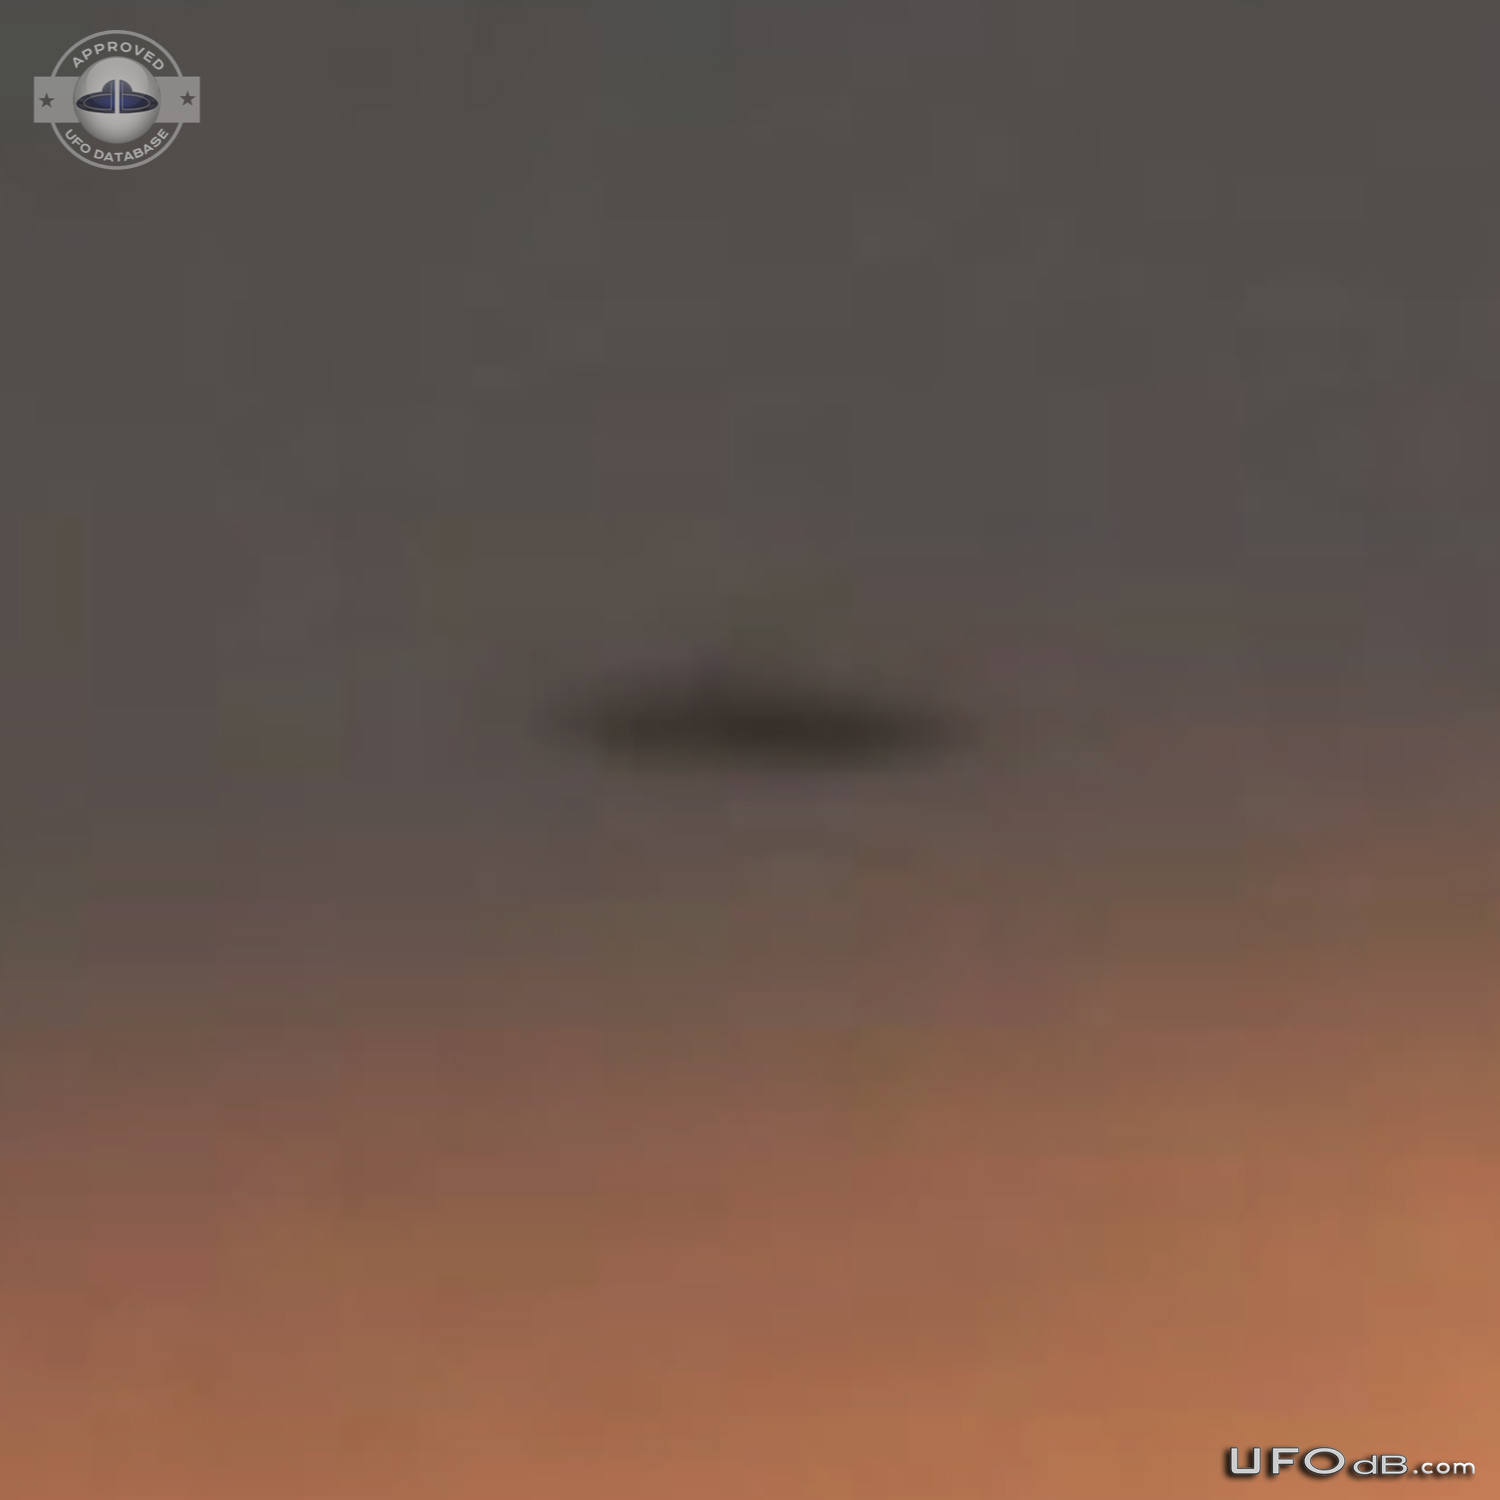 UFO saucer caught on picture - Lost River, West Virginia USA 2013 UFO Picture #616-5